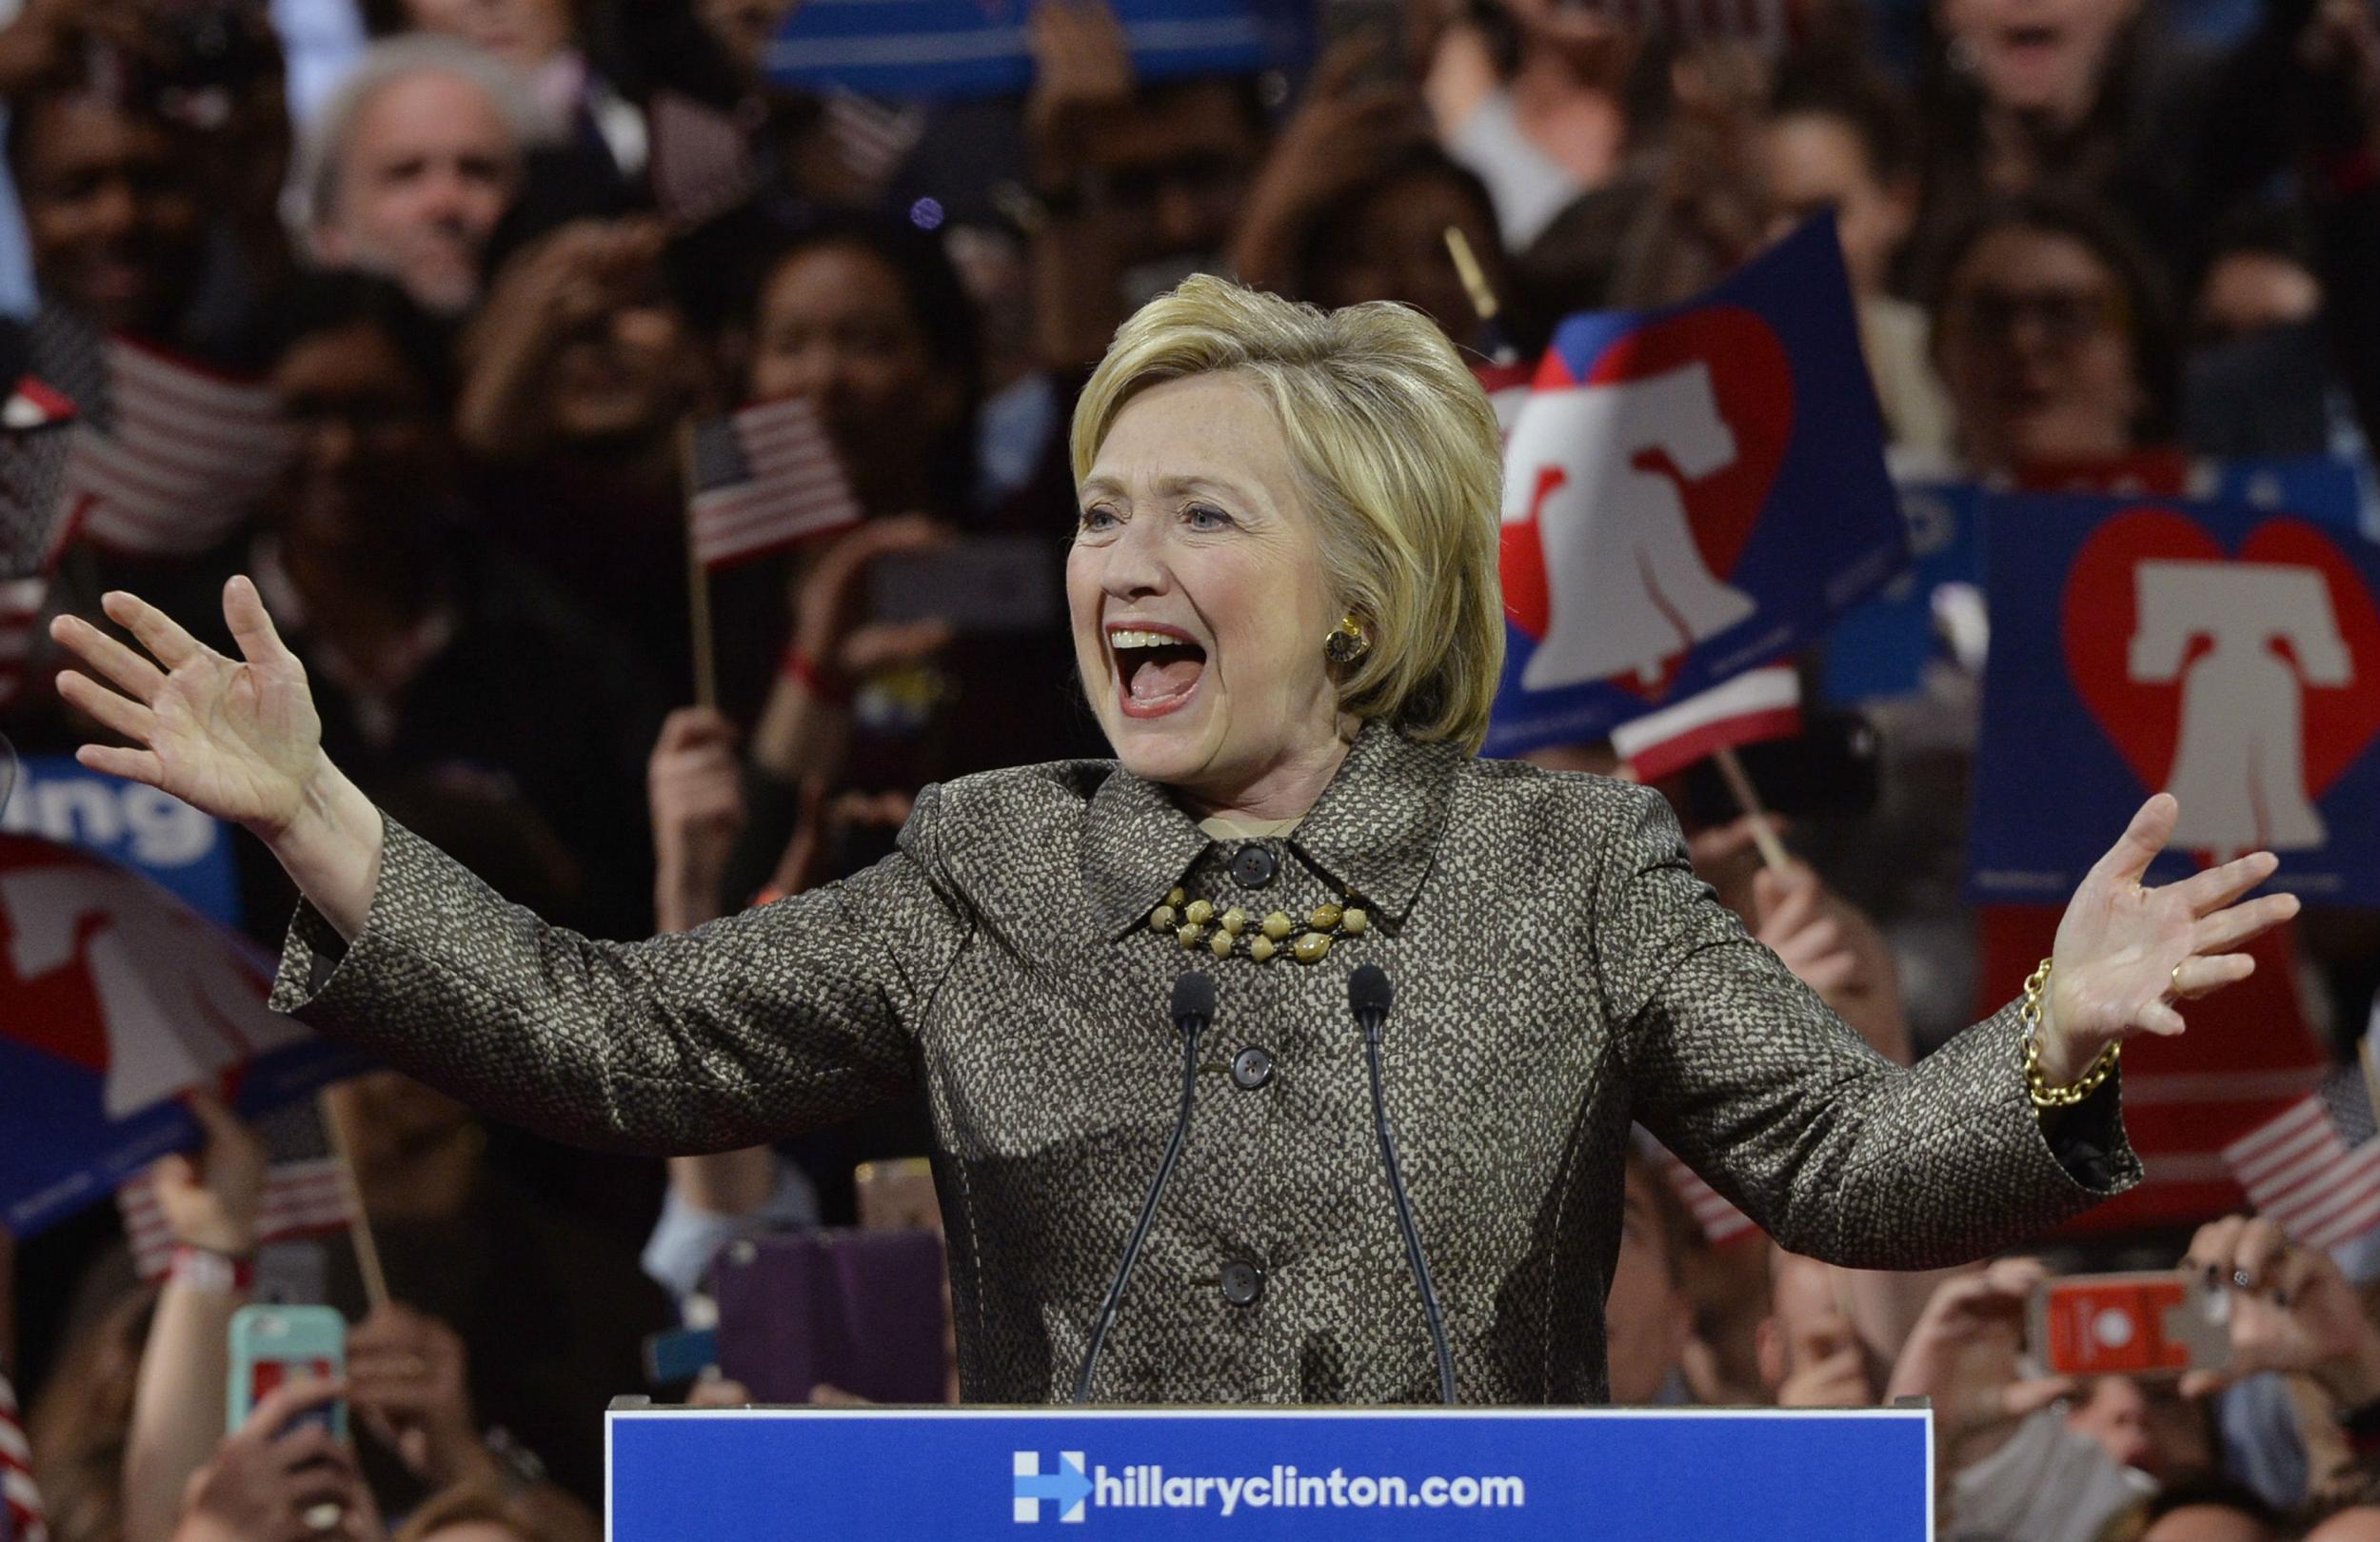 Hillary Clinton is also starting to focus on the general election